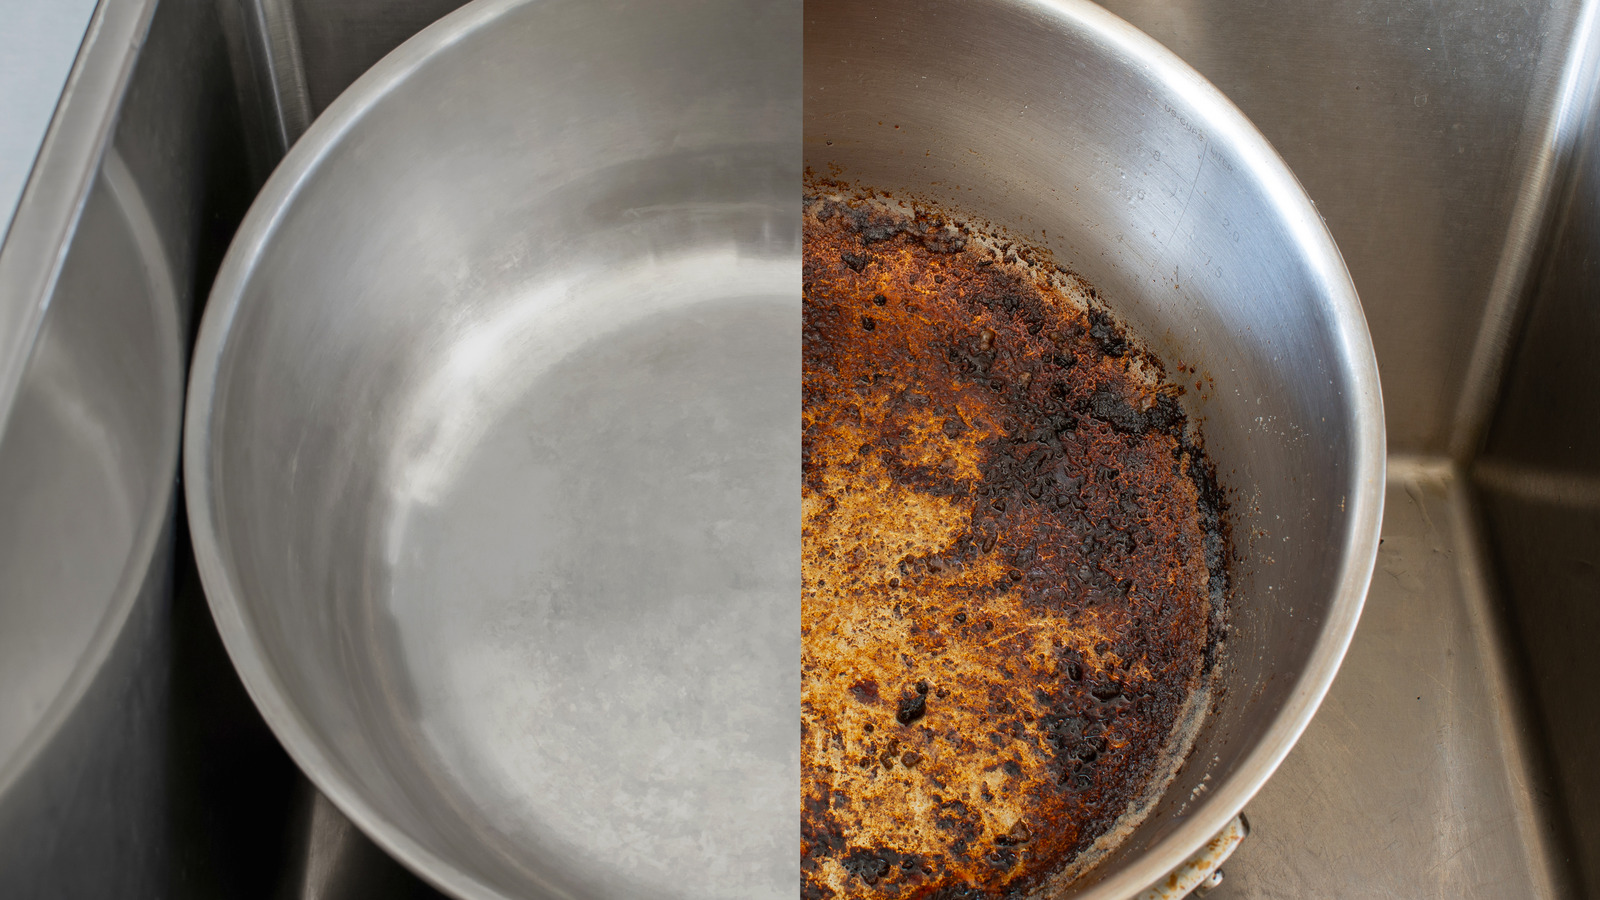 How to Clean and Care for Your Stainless Steel Cookware